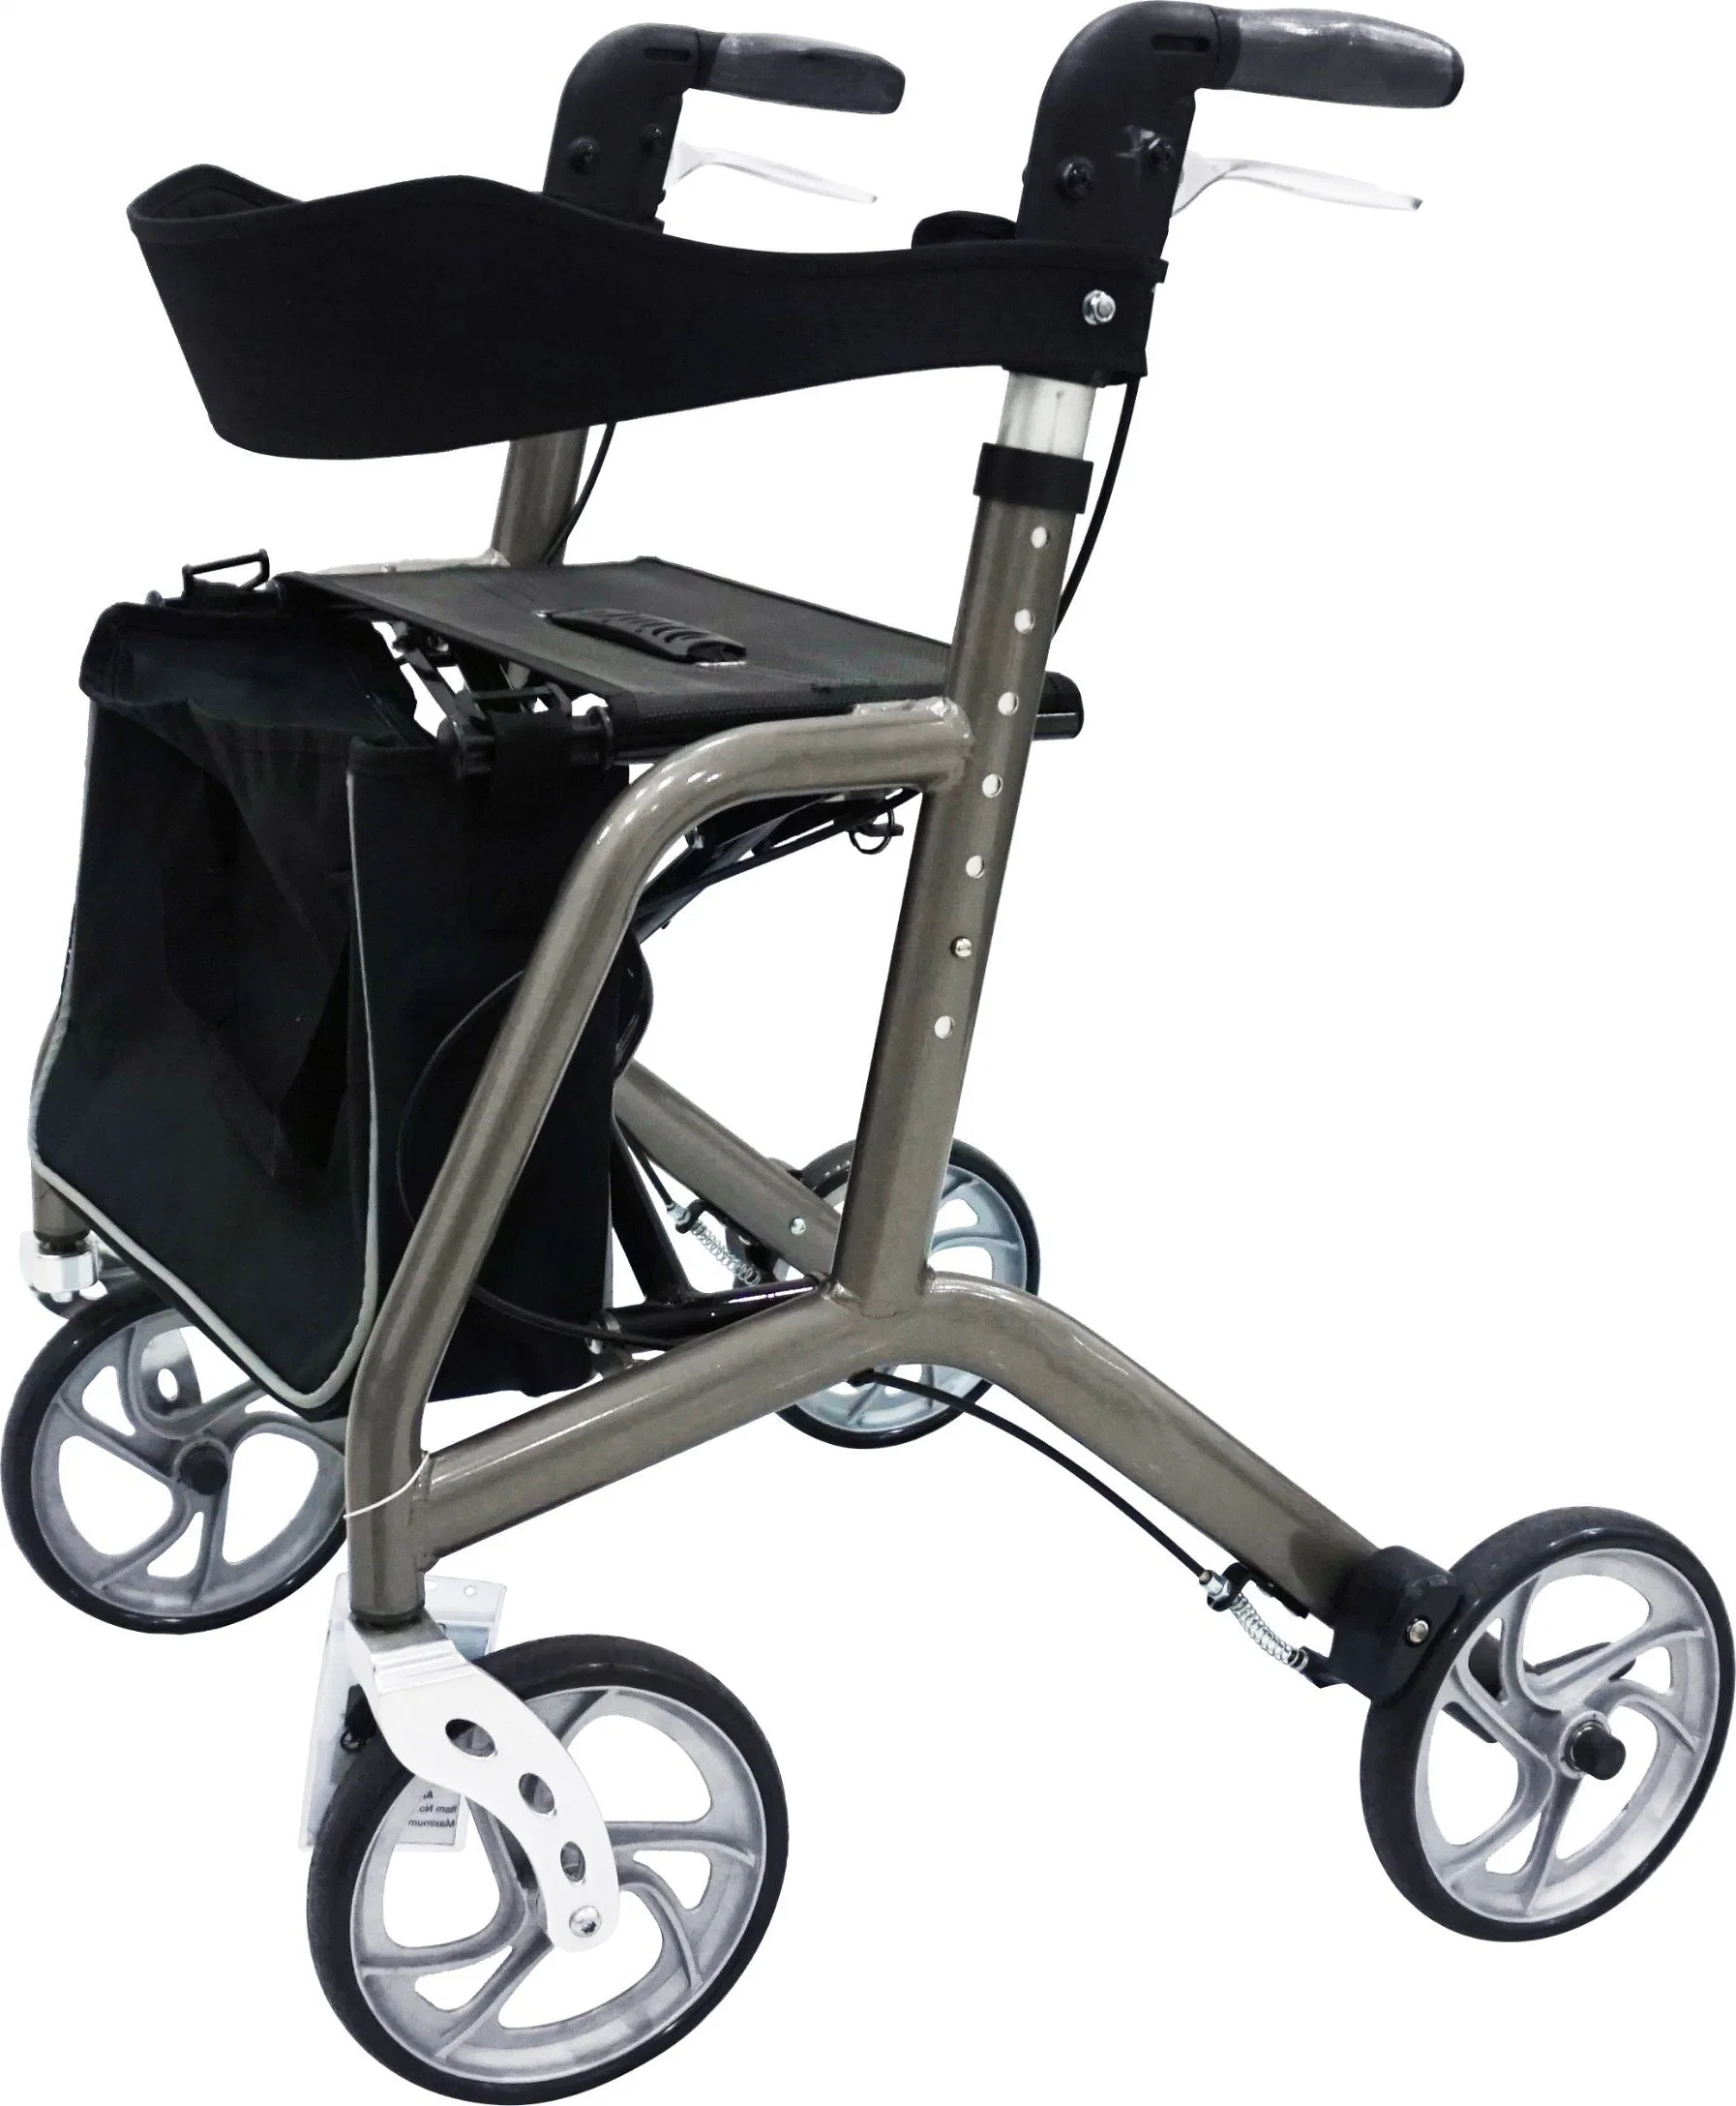 Heinsy Folding Empower Rollator Walker with Comfort Handles and Thick Backrest